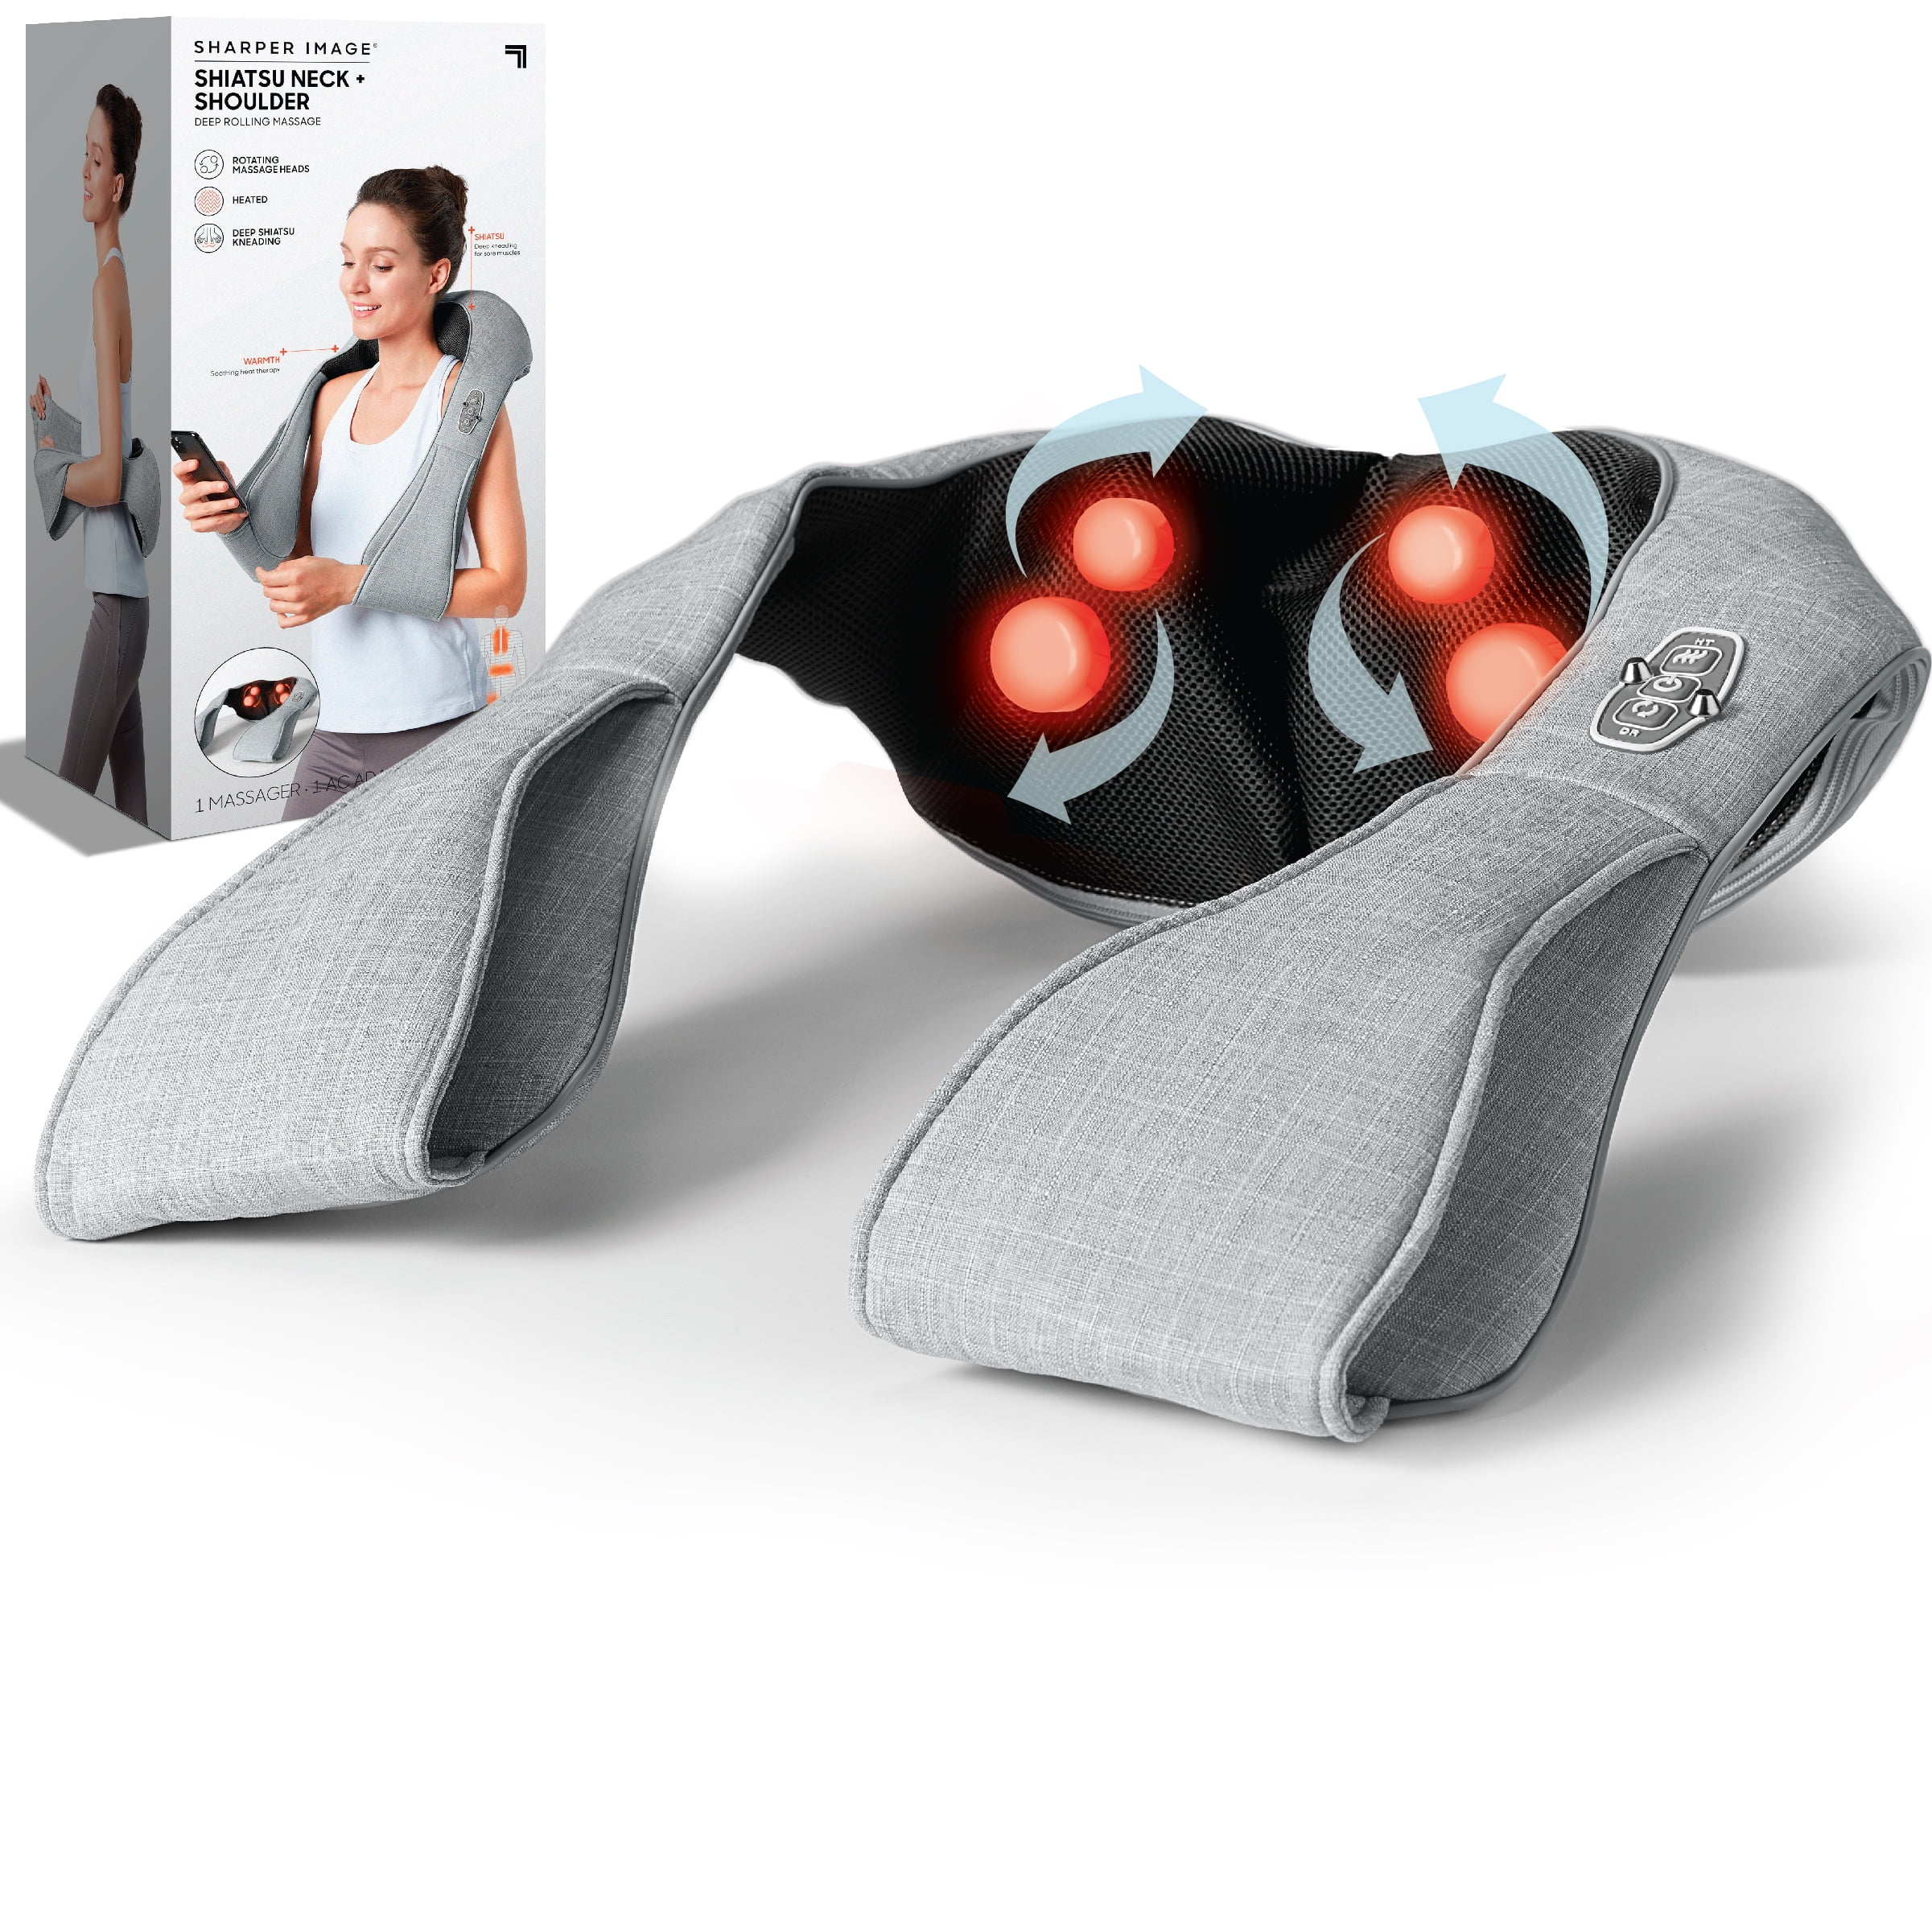  Sharper Image Shiatsu Neck + Back Kneading Massager, Rotating  Massage Nodes with Arm Straps for Pain & Tension Relief, Improve Relaxation  & Circulation, Reduce Stress : Health & Household